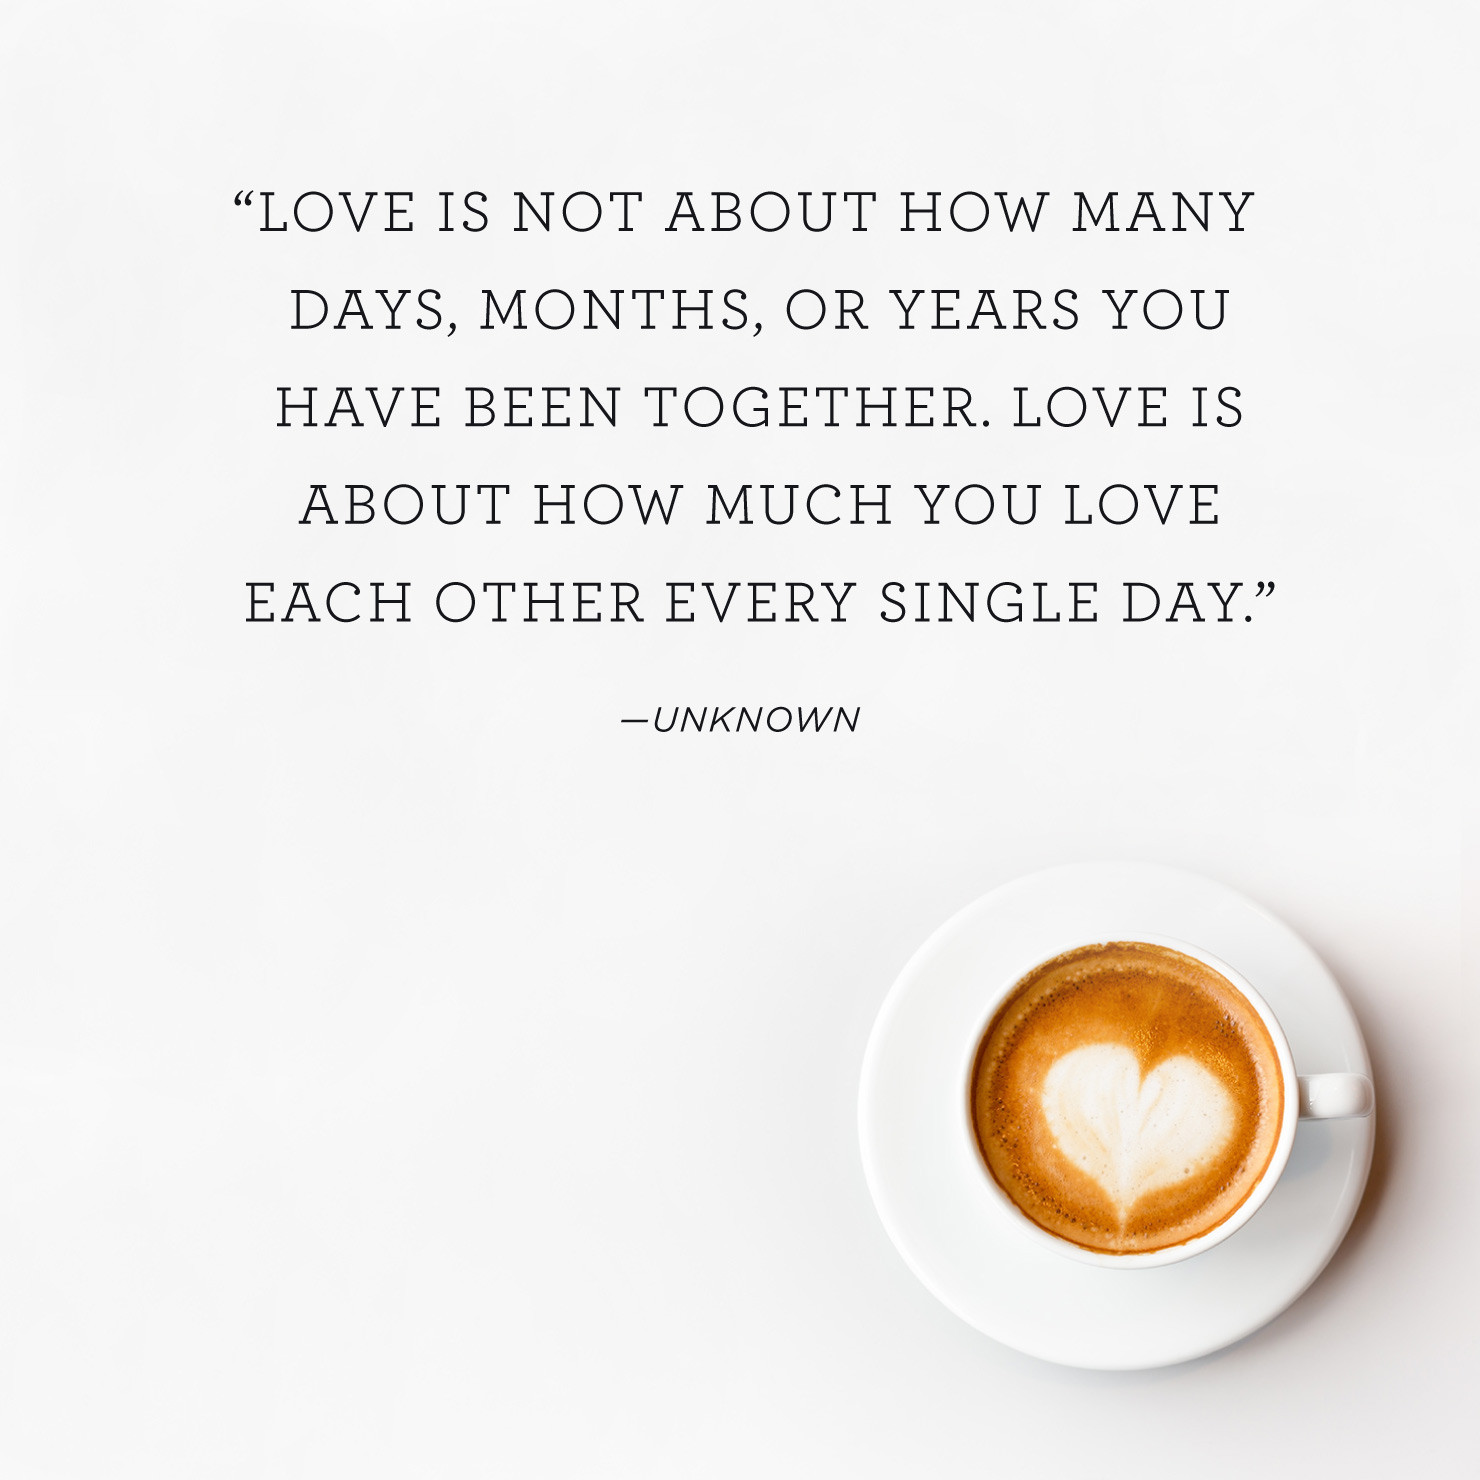 Happy One Year Anniversary Quotes
 60 Happy Anniversary Quotes to Celebrate Your Love